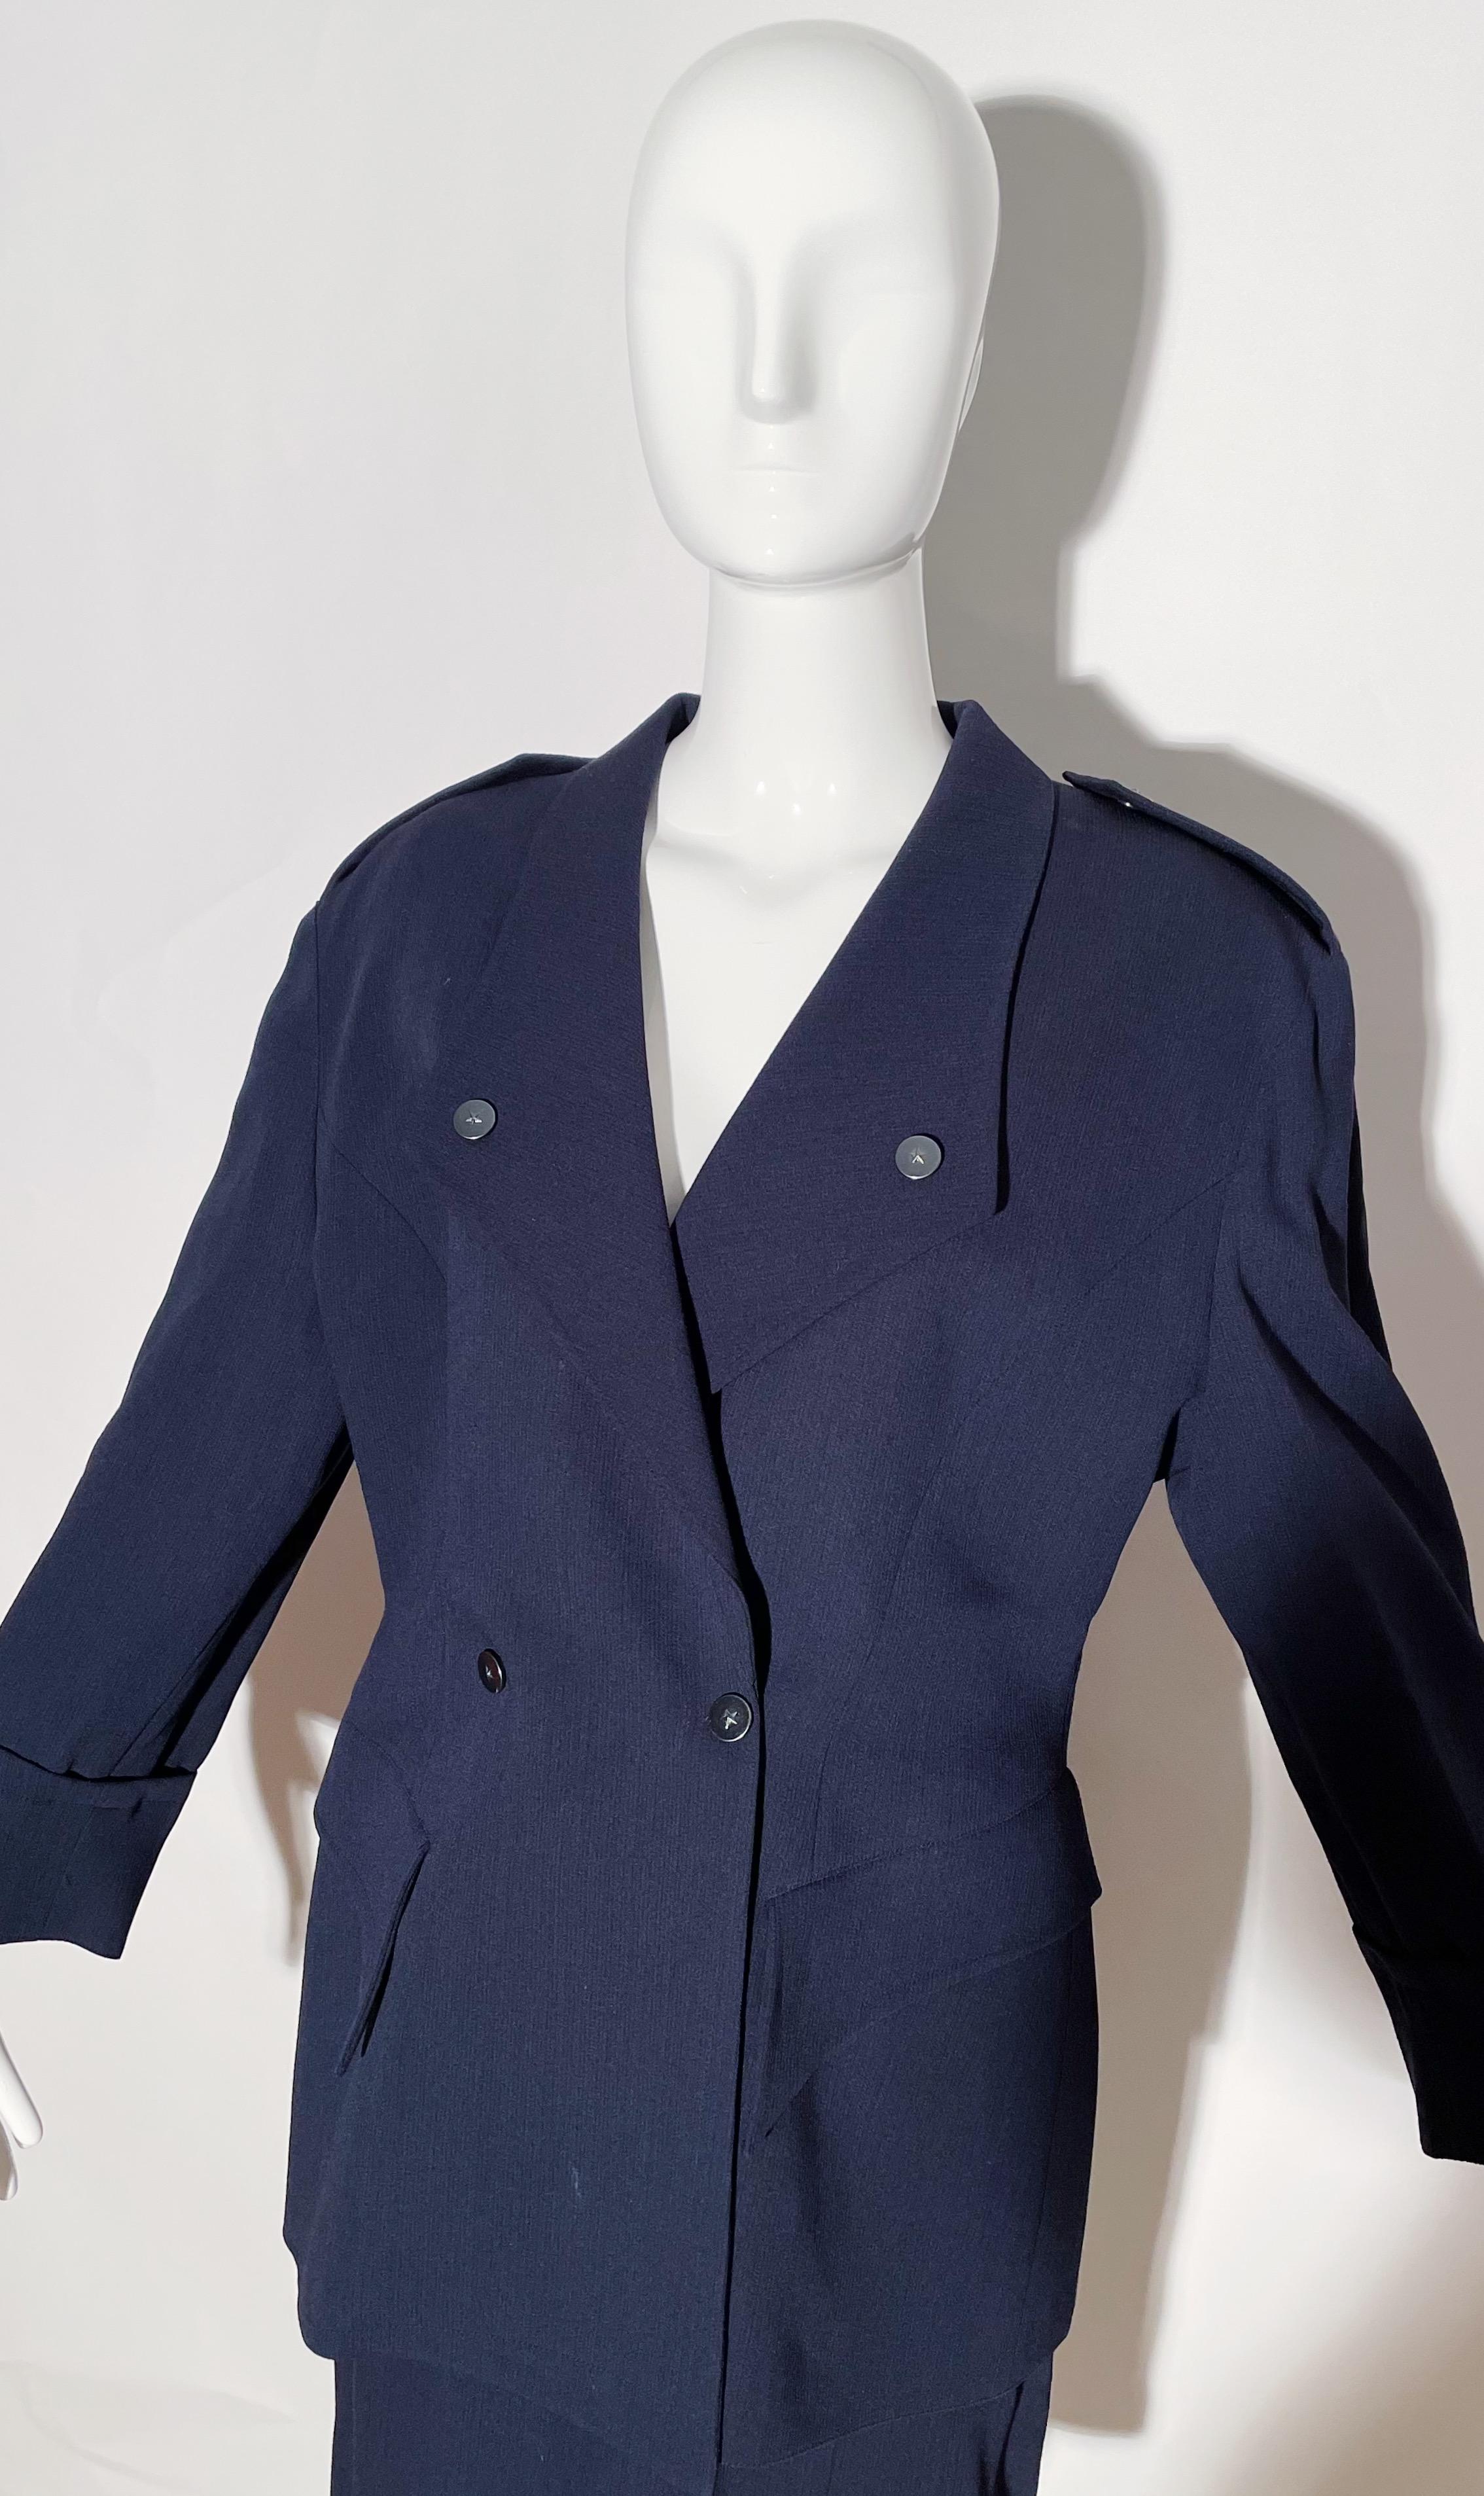 Thierry Mugler Navy Skirt Suit In Excellent Condition For Sale In Waterford, MI